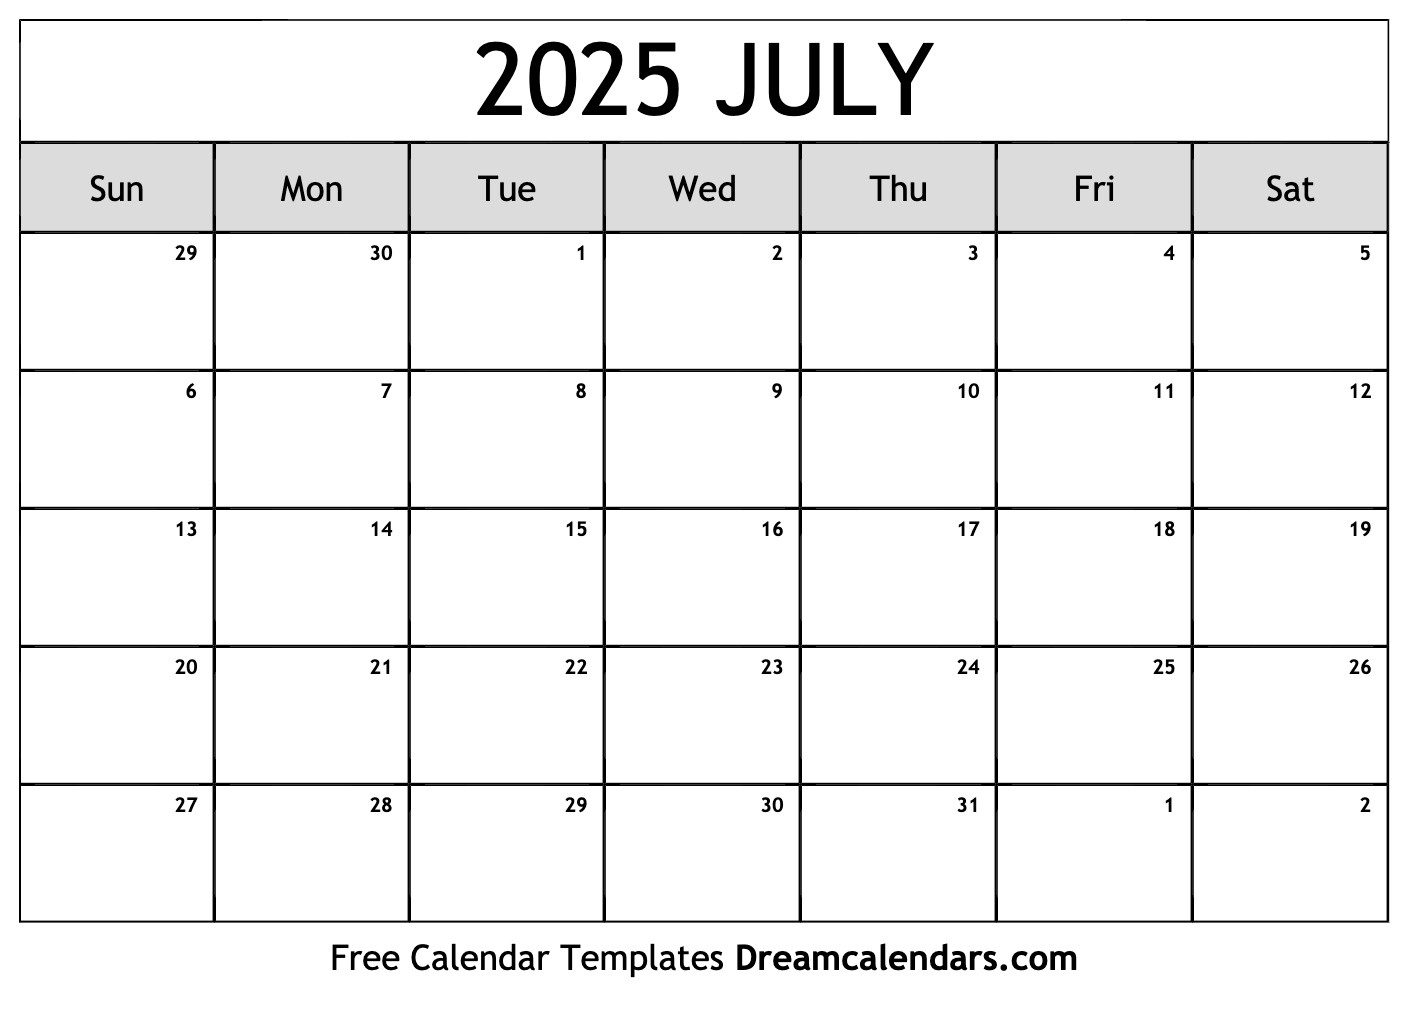 July 2025 Calendar - Free Printable With Holidays And Observances pertaining to Calendar For July 2025